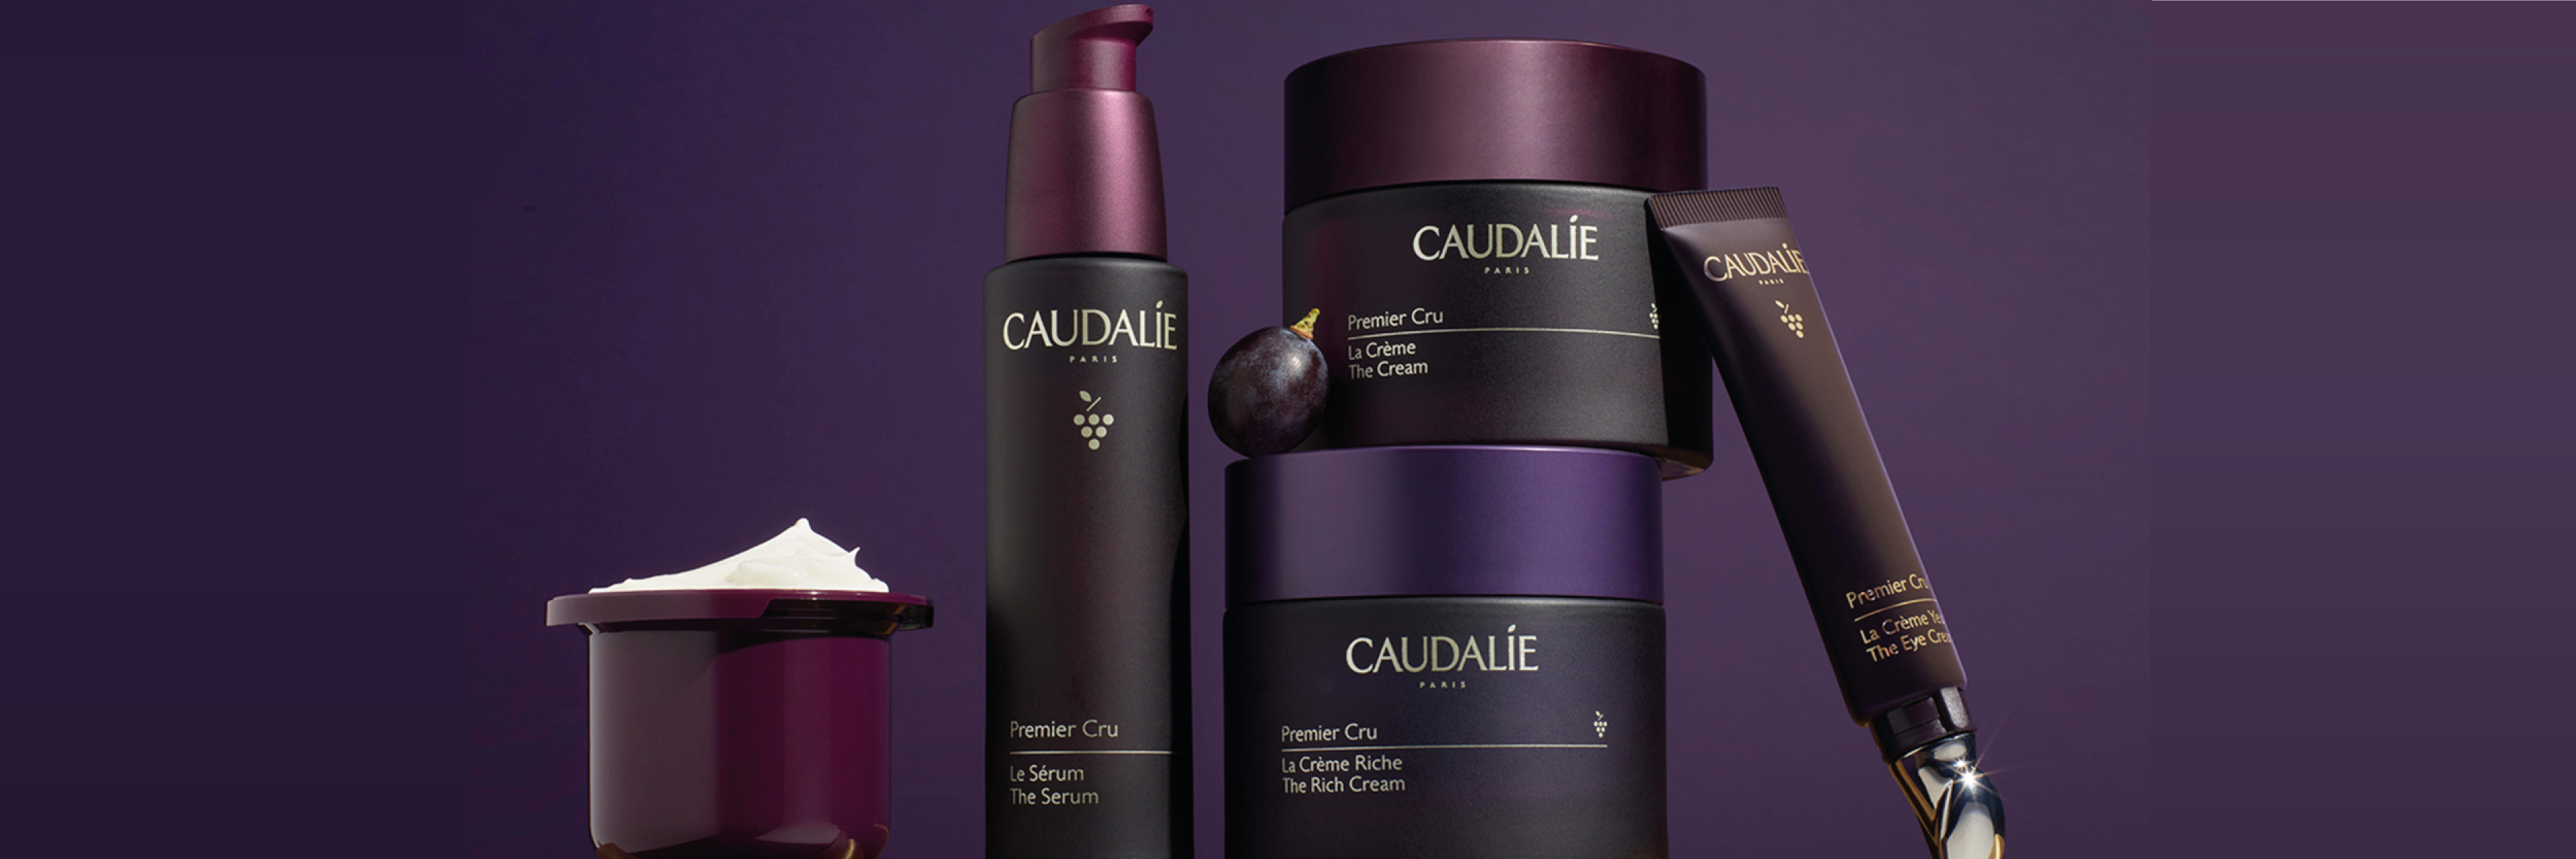 Caudalie Premier Cru: recover your youth